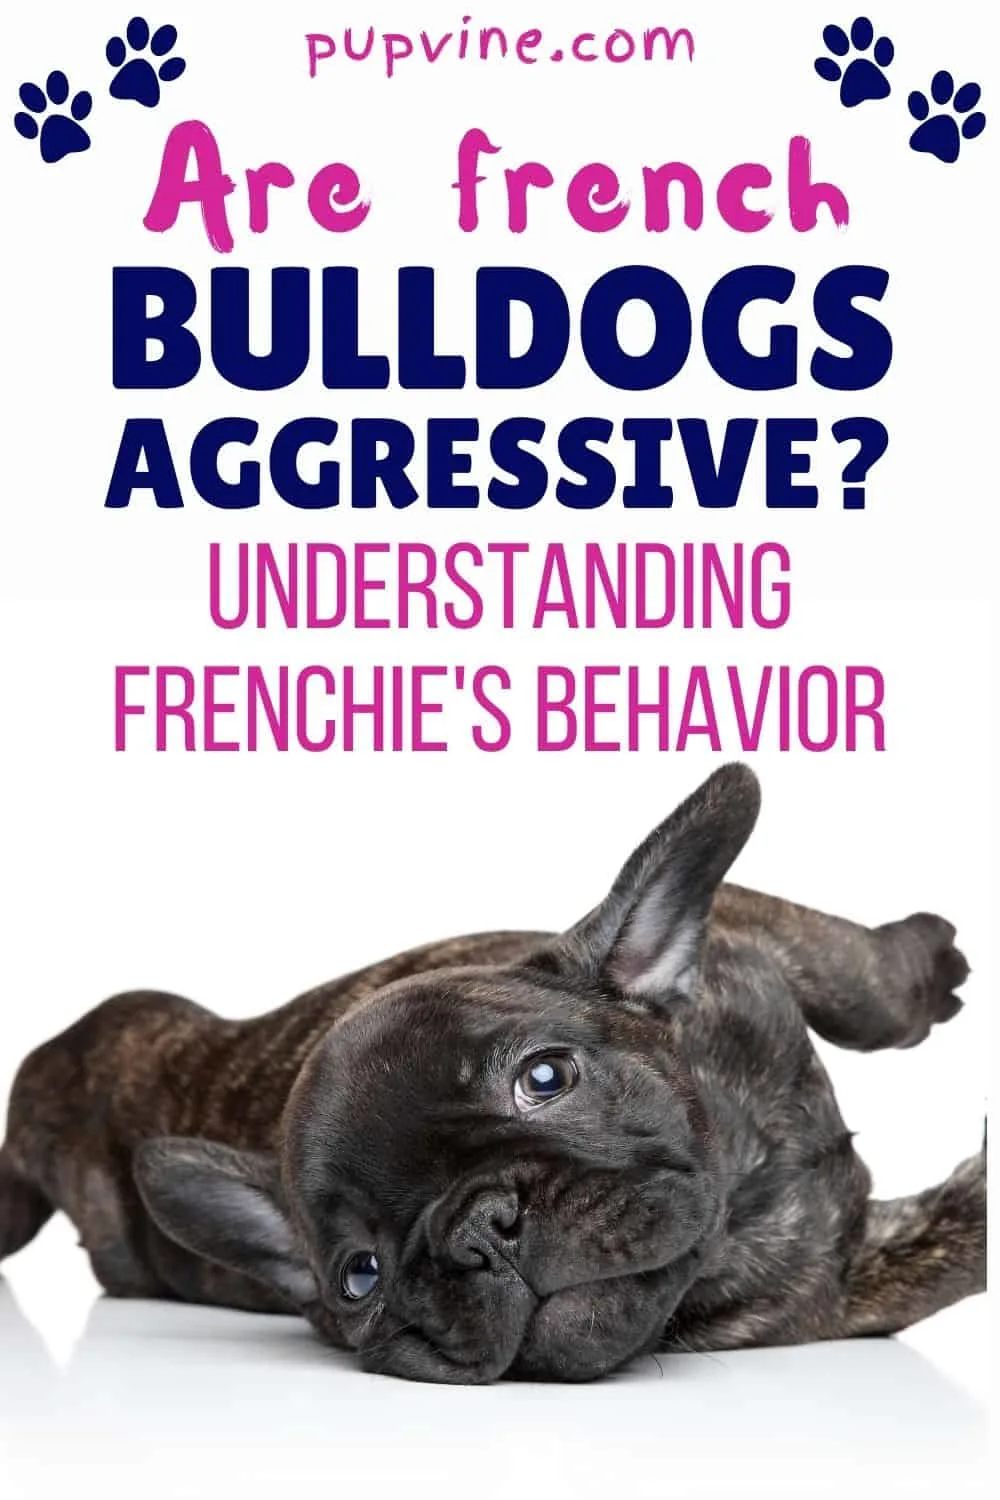 Are French Bulldogs Aggressive? Understanding Frenchie's Behavior